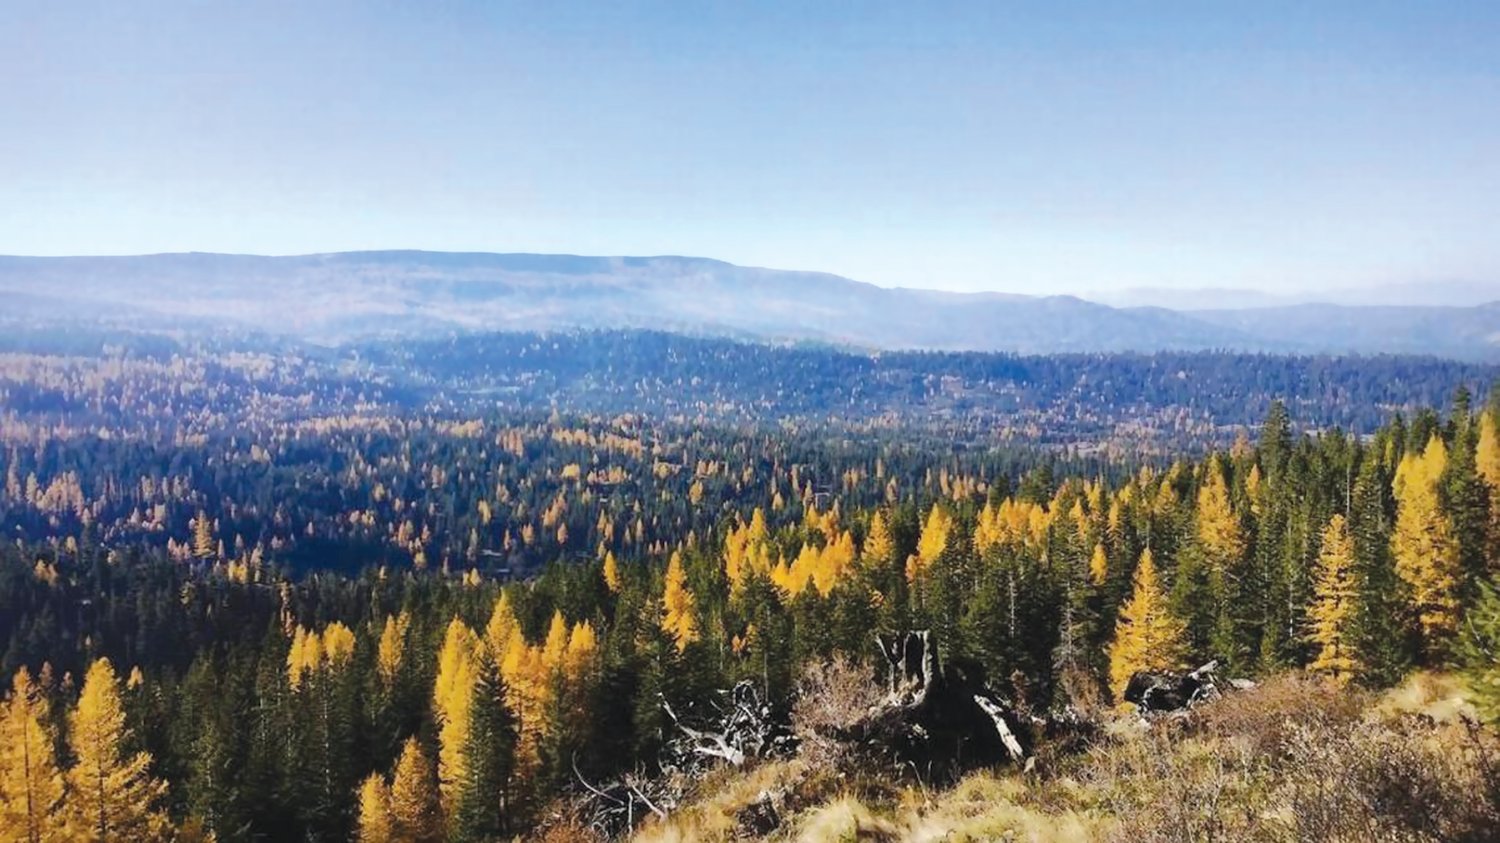 The forested land that includes Naenum Ridge is pictured here. About 555,000 acres of forests in Washington were damaged by last year’s intense summer heat, foliar diseases and beetles, according to the Department of Natural Resources.